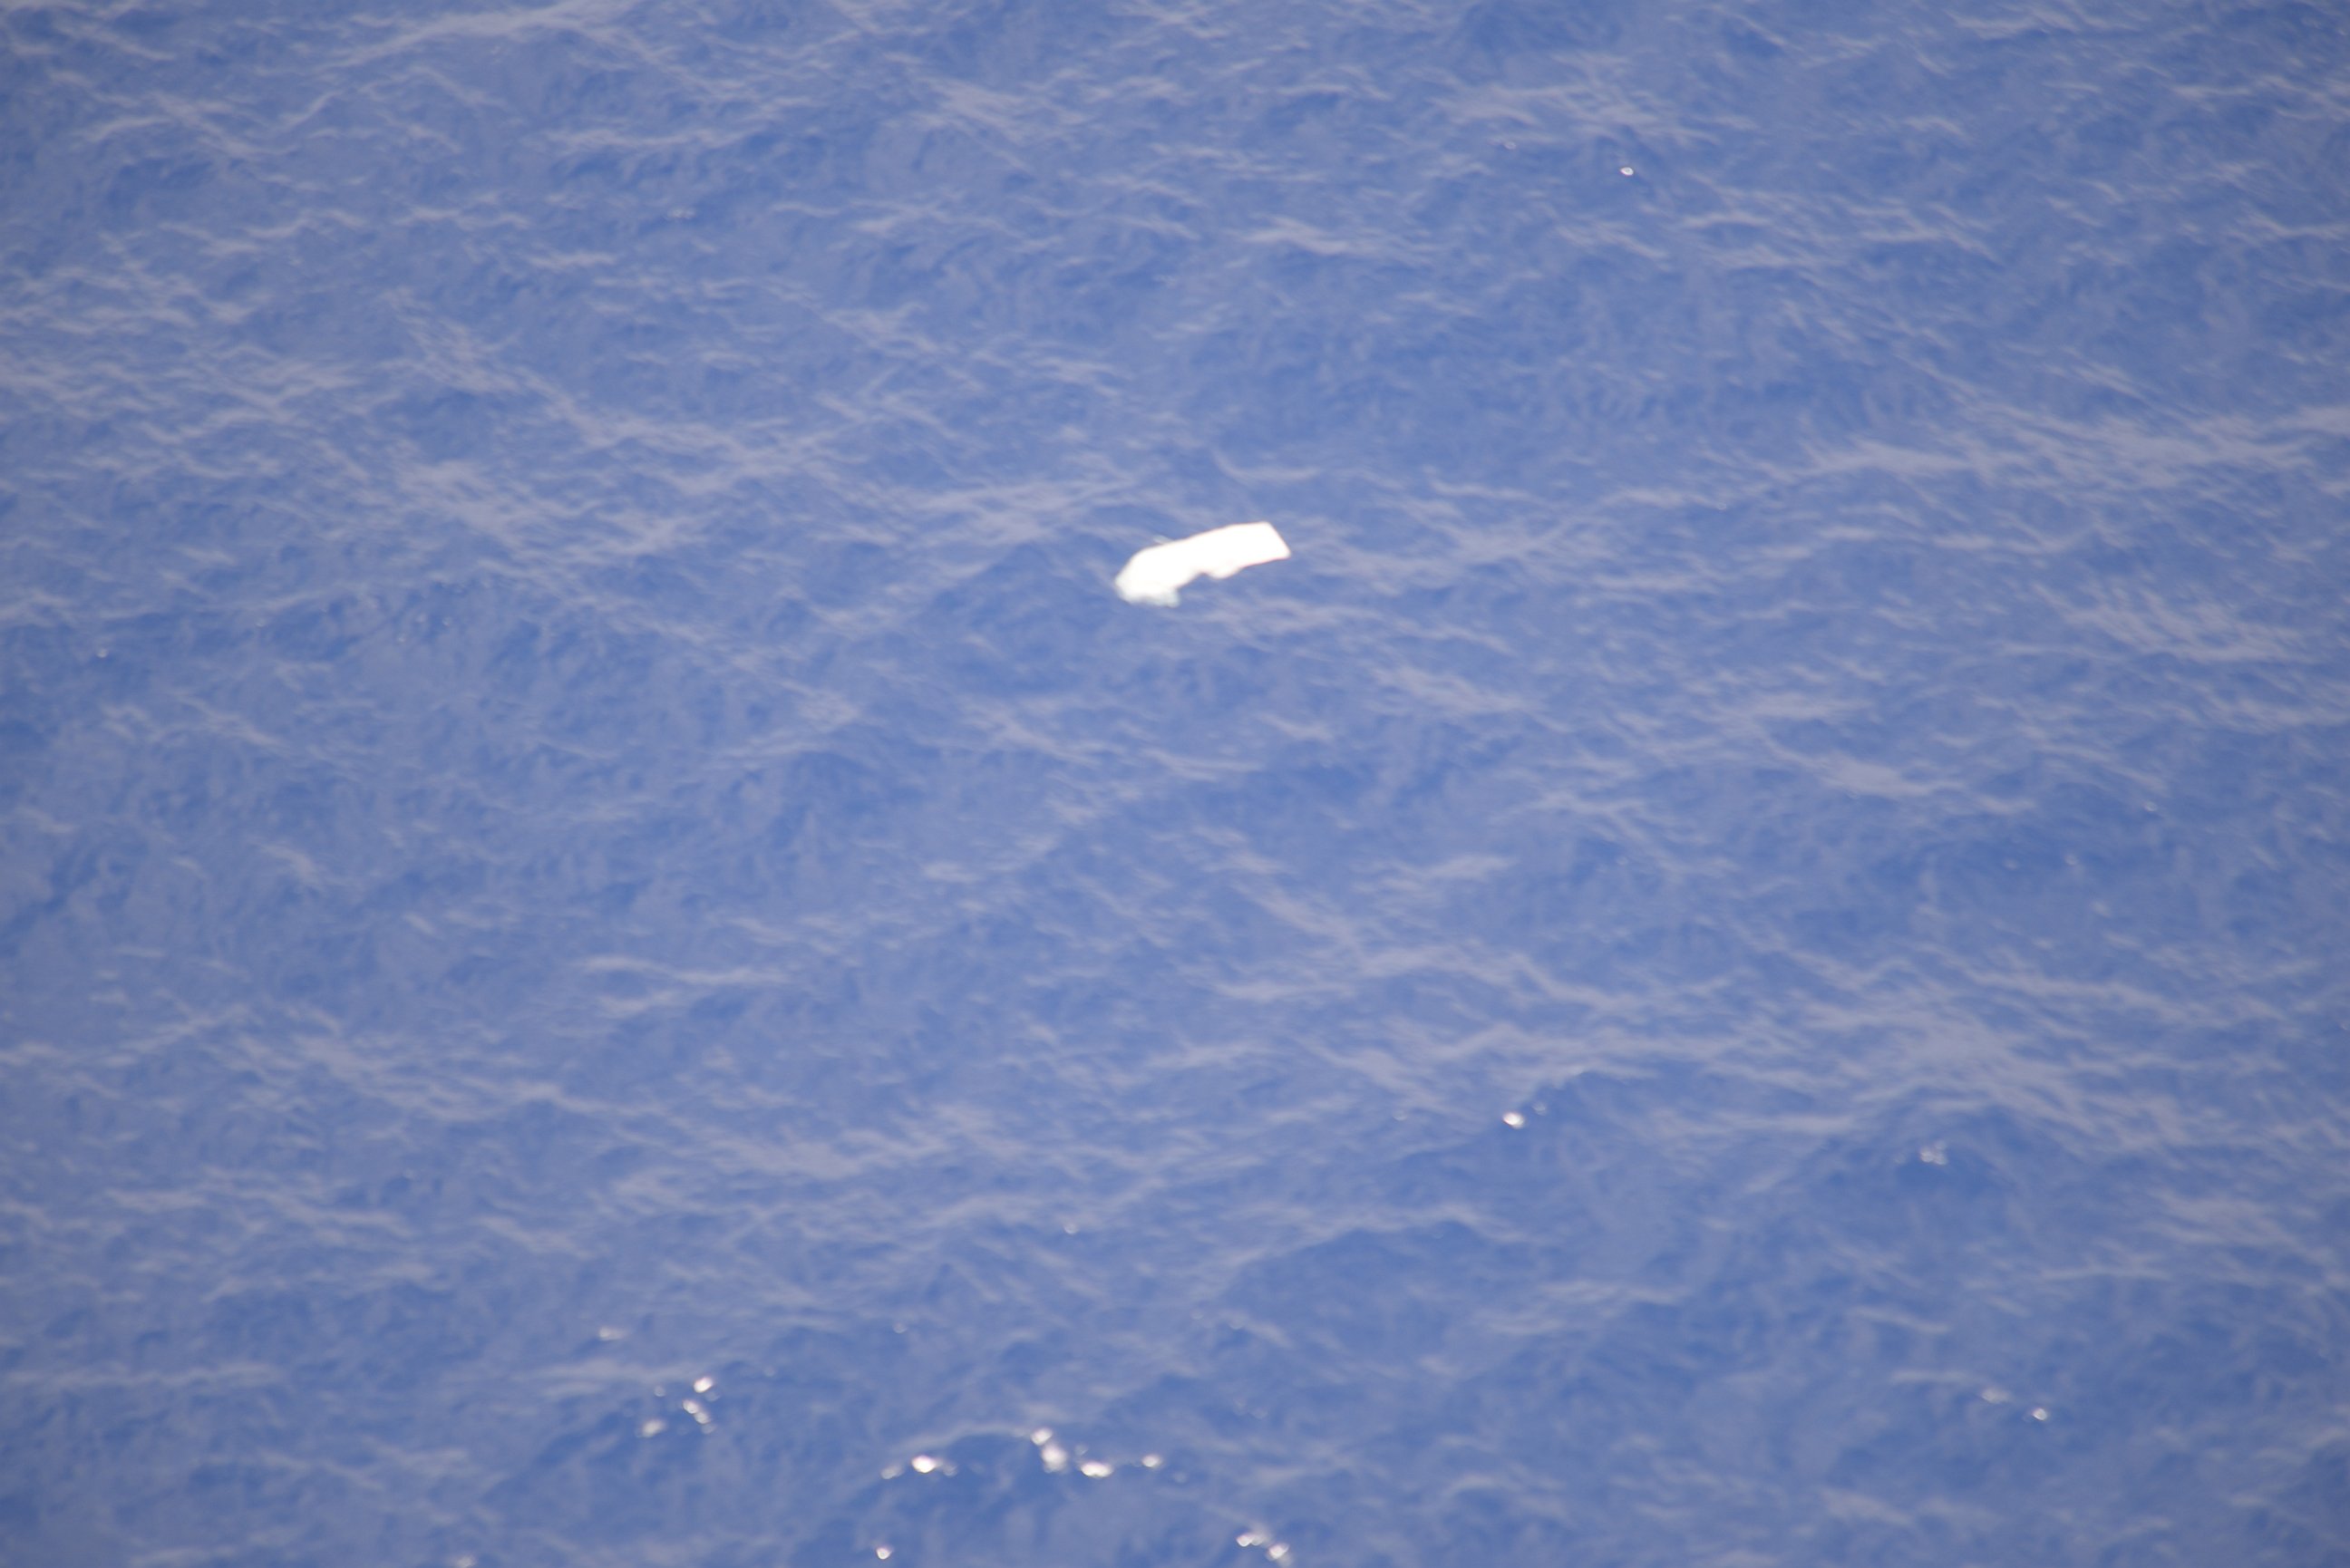 PHOTO: Possible debris from EgyptAir flight MS804 as seen from a P-3 Orion maritime patrol aircraft from Patrol Squadron 4, May 21, 2016.